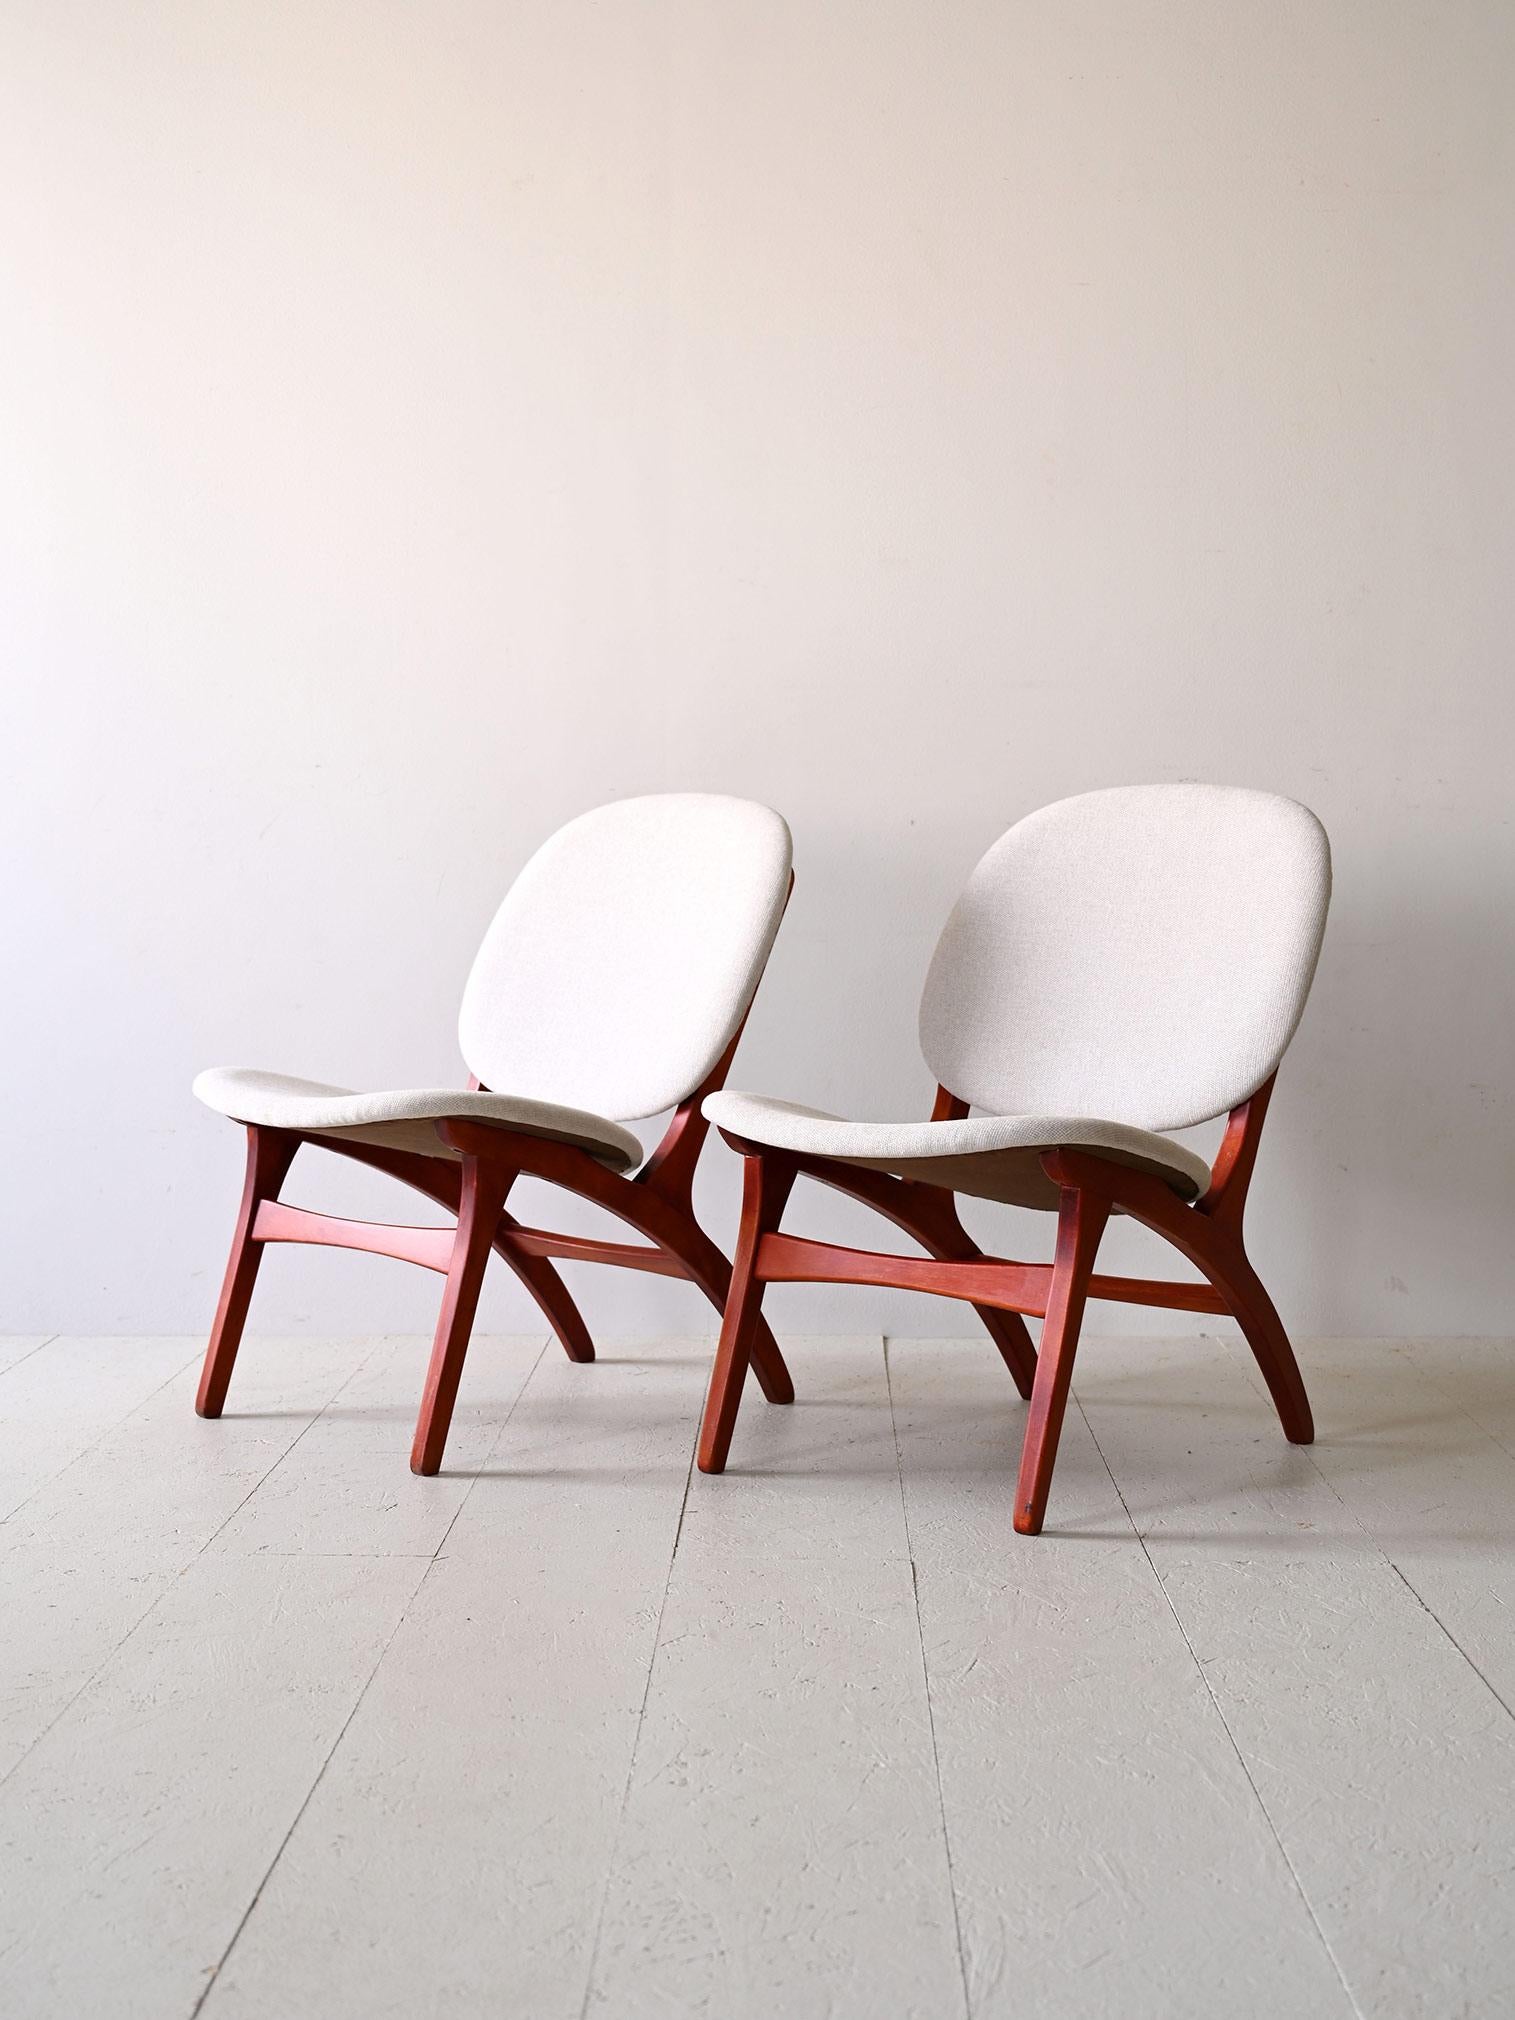 Armchairs designed by Carl Edward Matthes In Good Condition For Sale In Brescia, IT